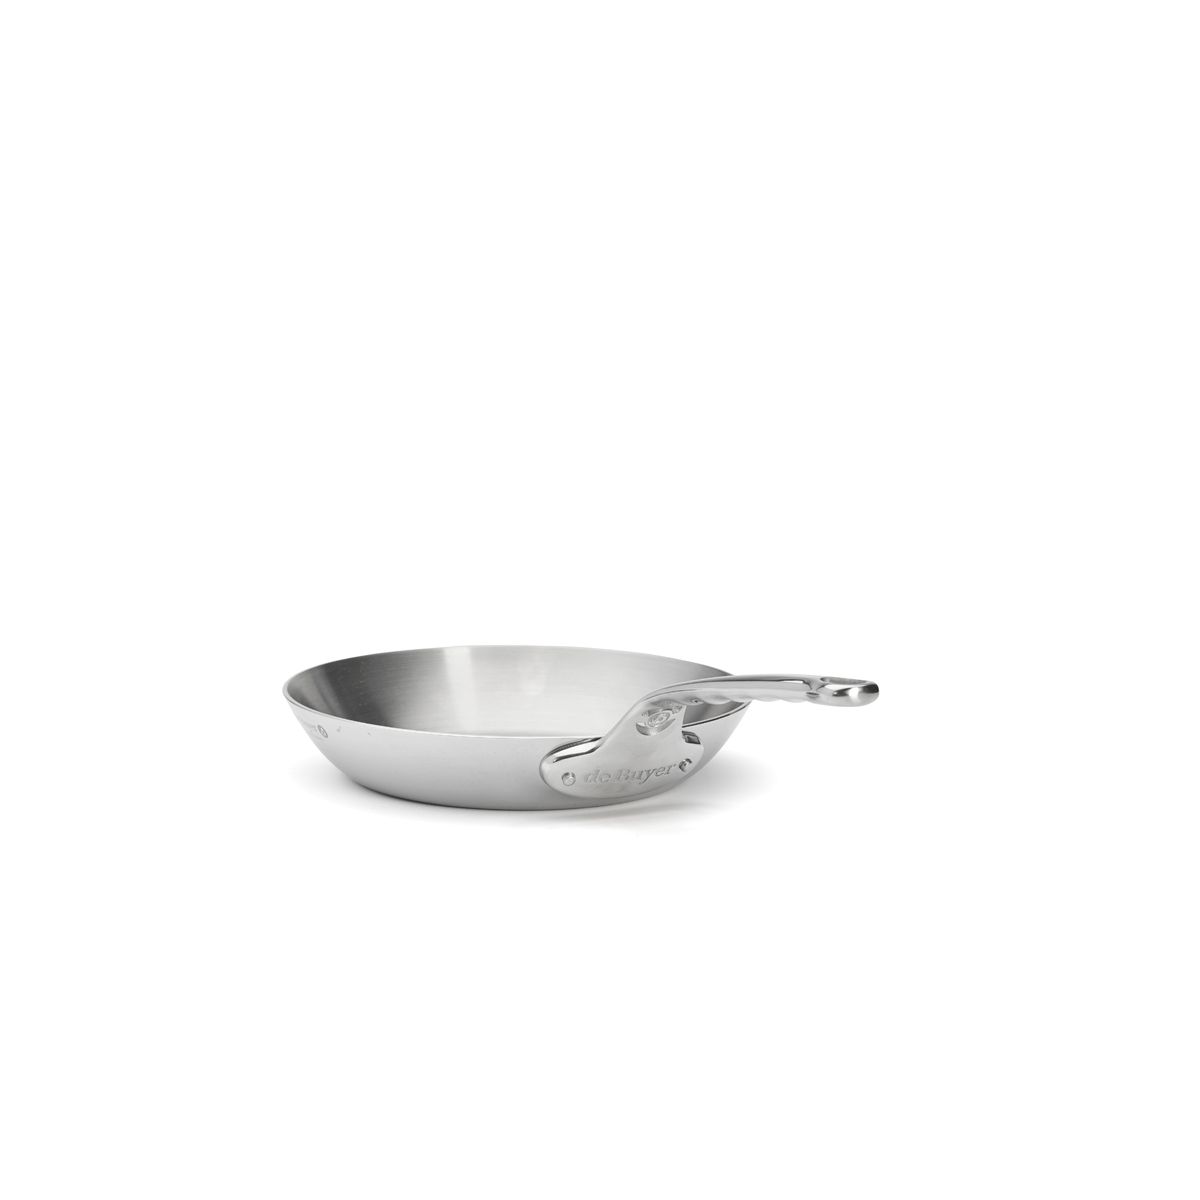 de Buyer Affinity 9 5/16 5-Ply Stainless Steel Fry Pan 3724.24